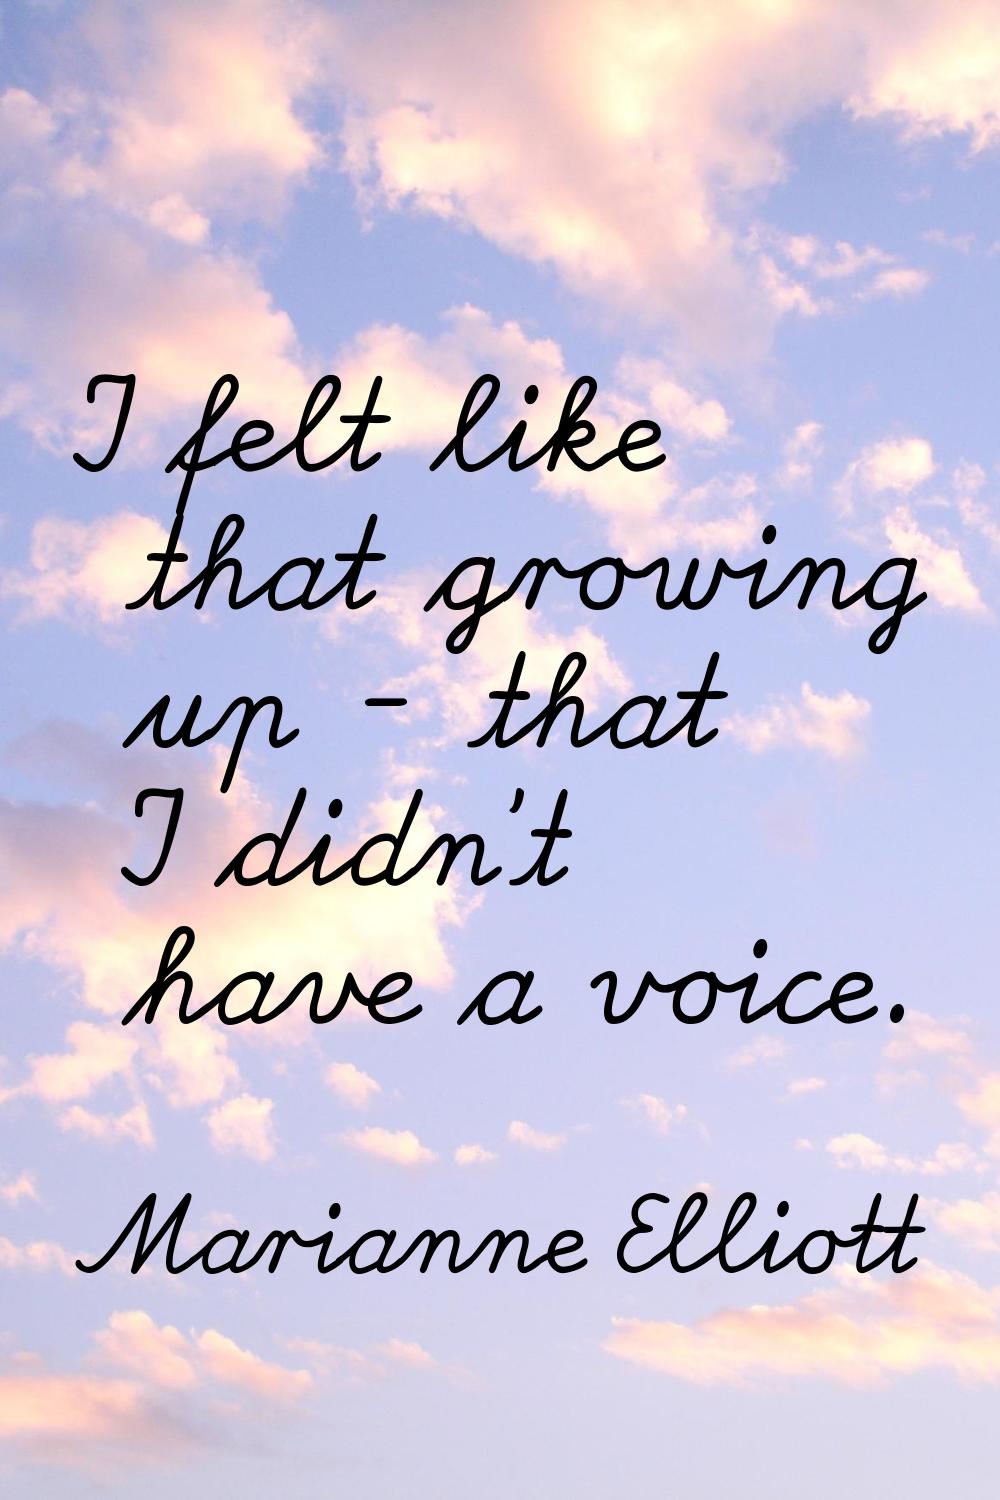 I felt like that growing up - that I didn't have a voice.